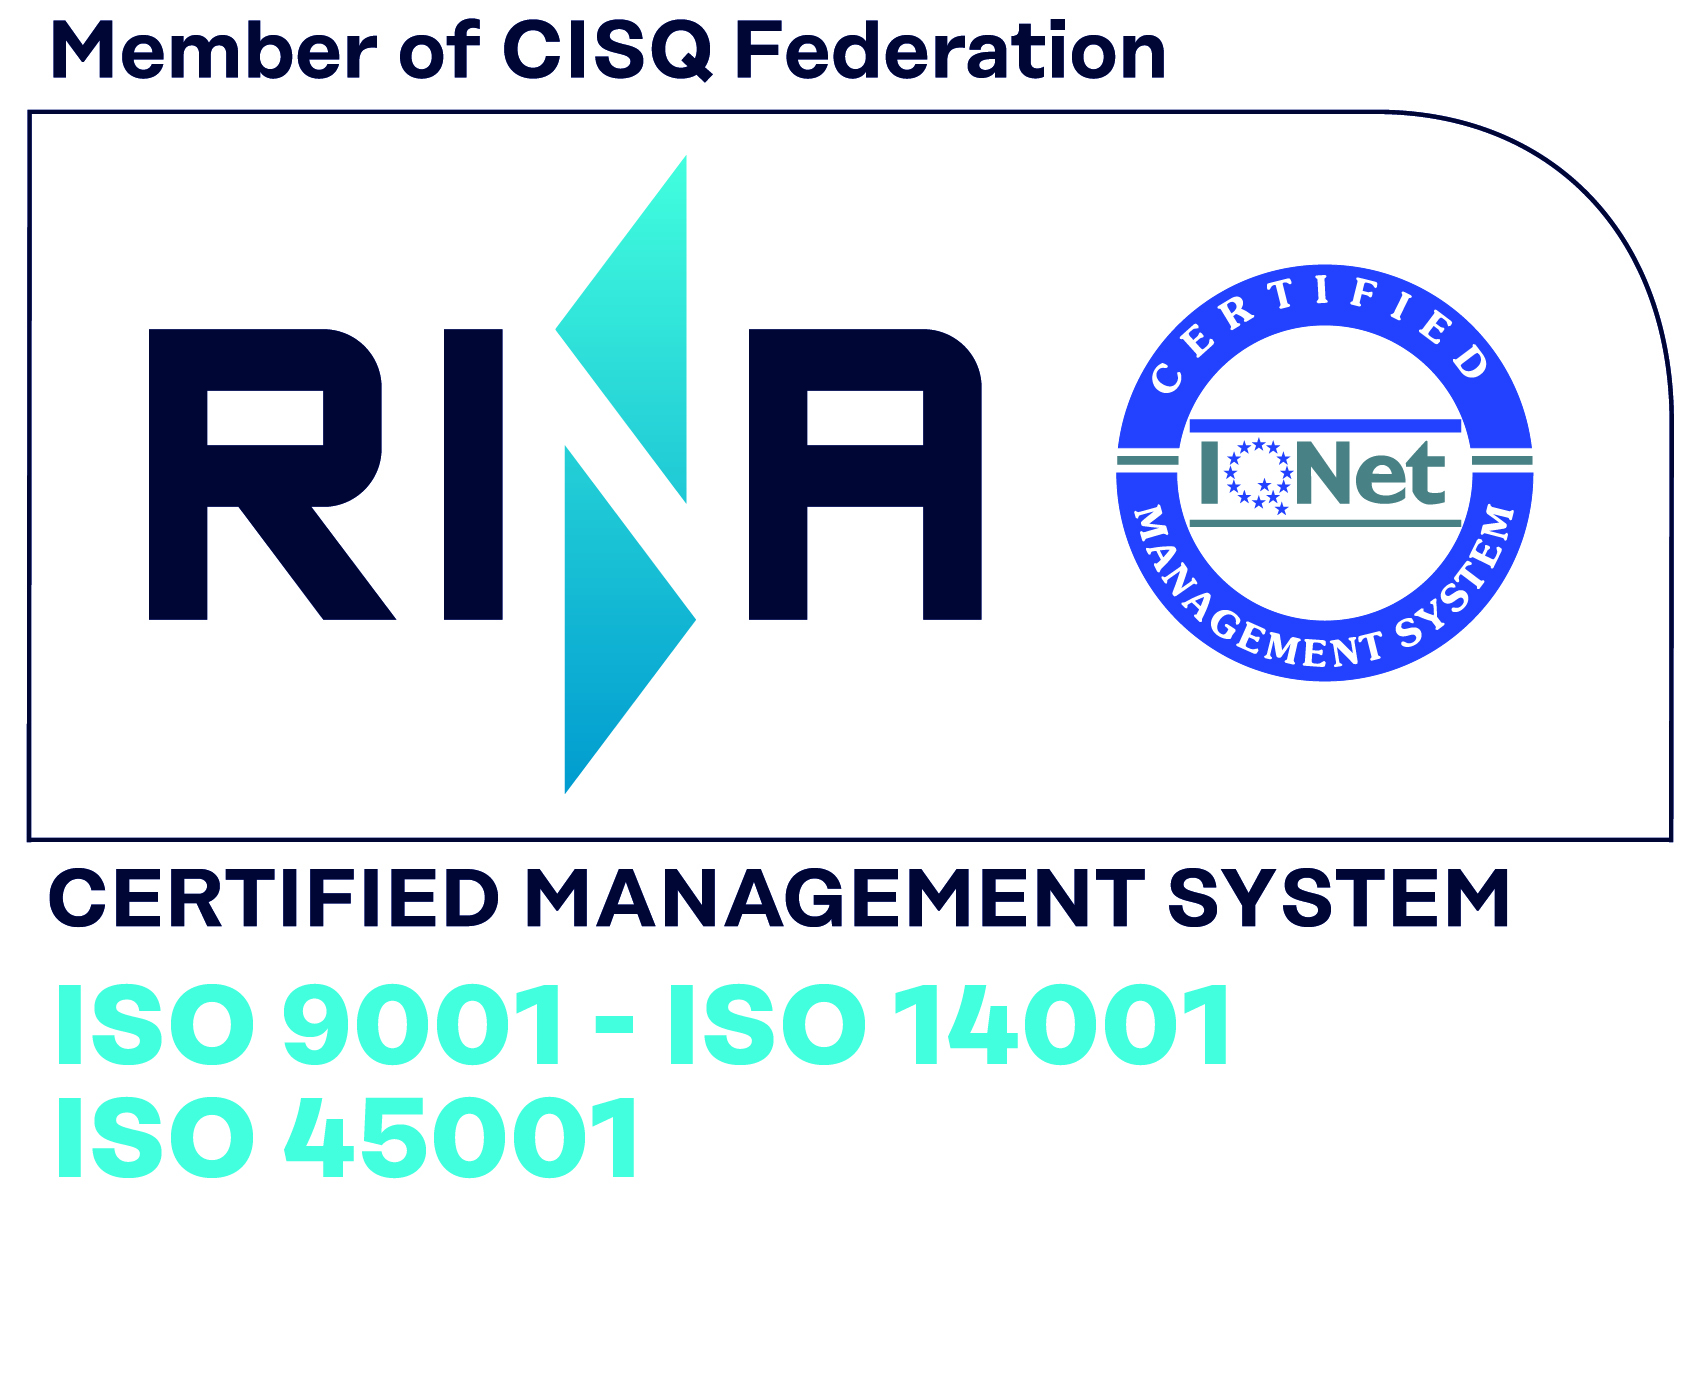 ISO 9001 ISO 14001 ISO 45001 col